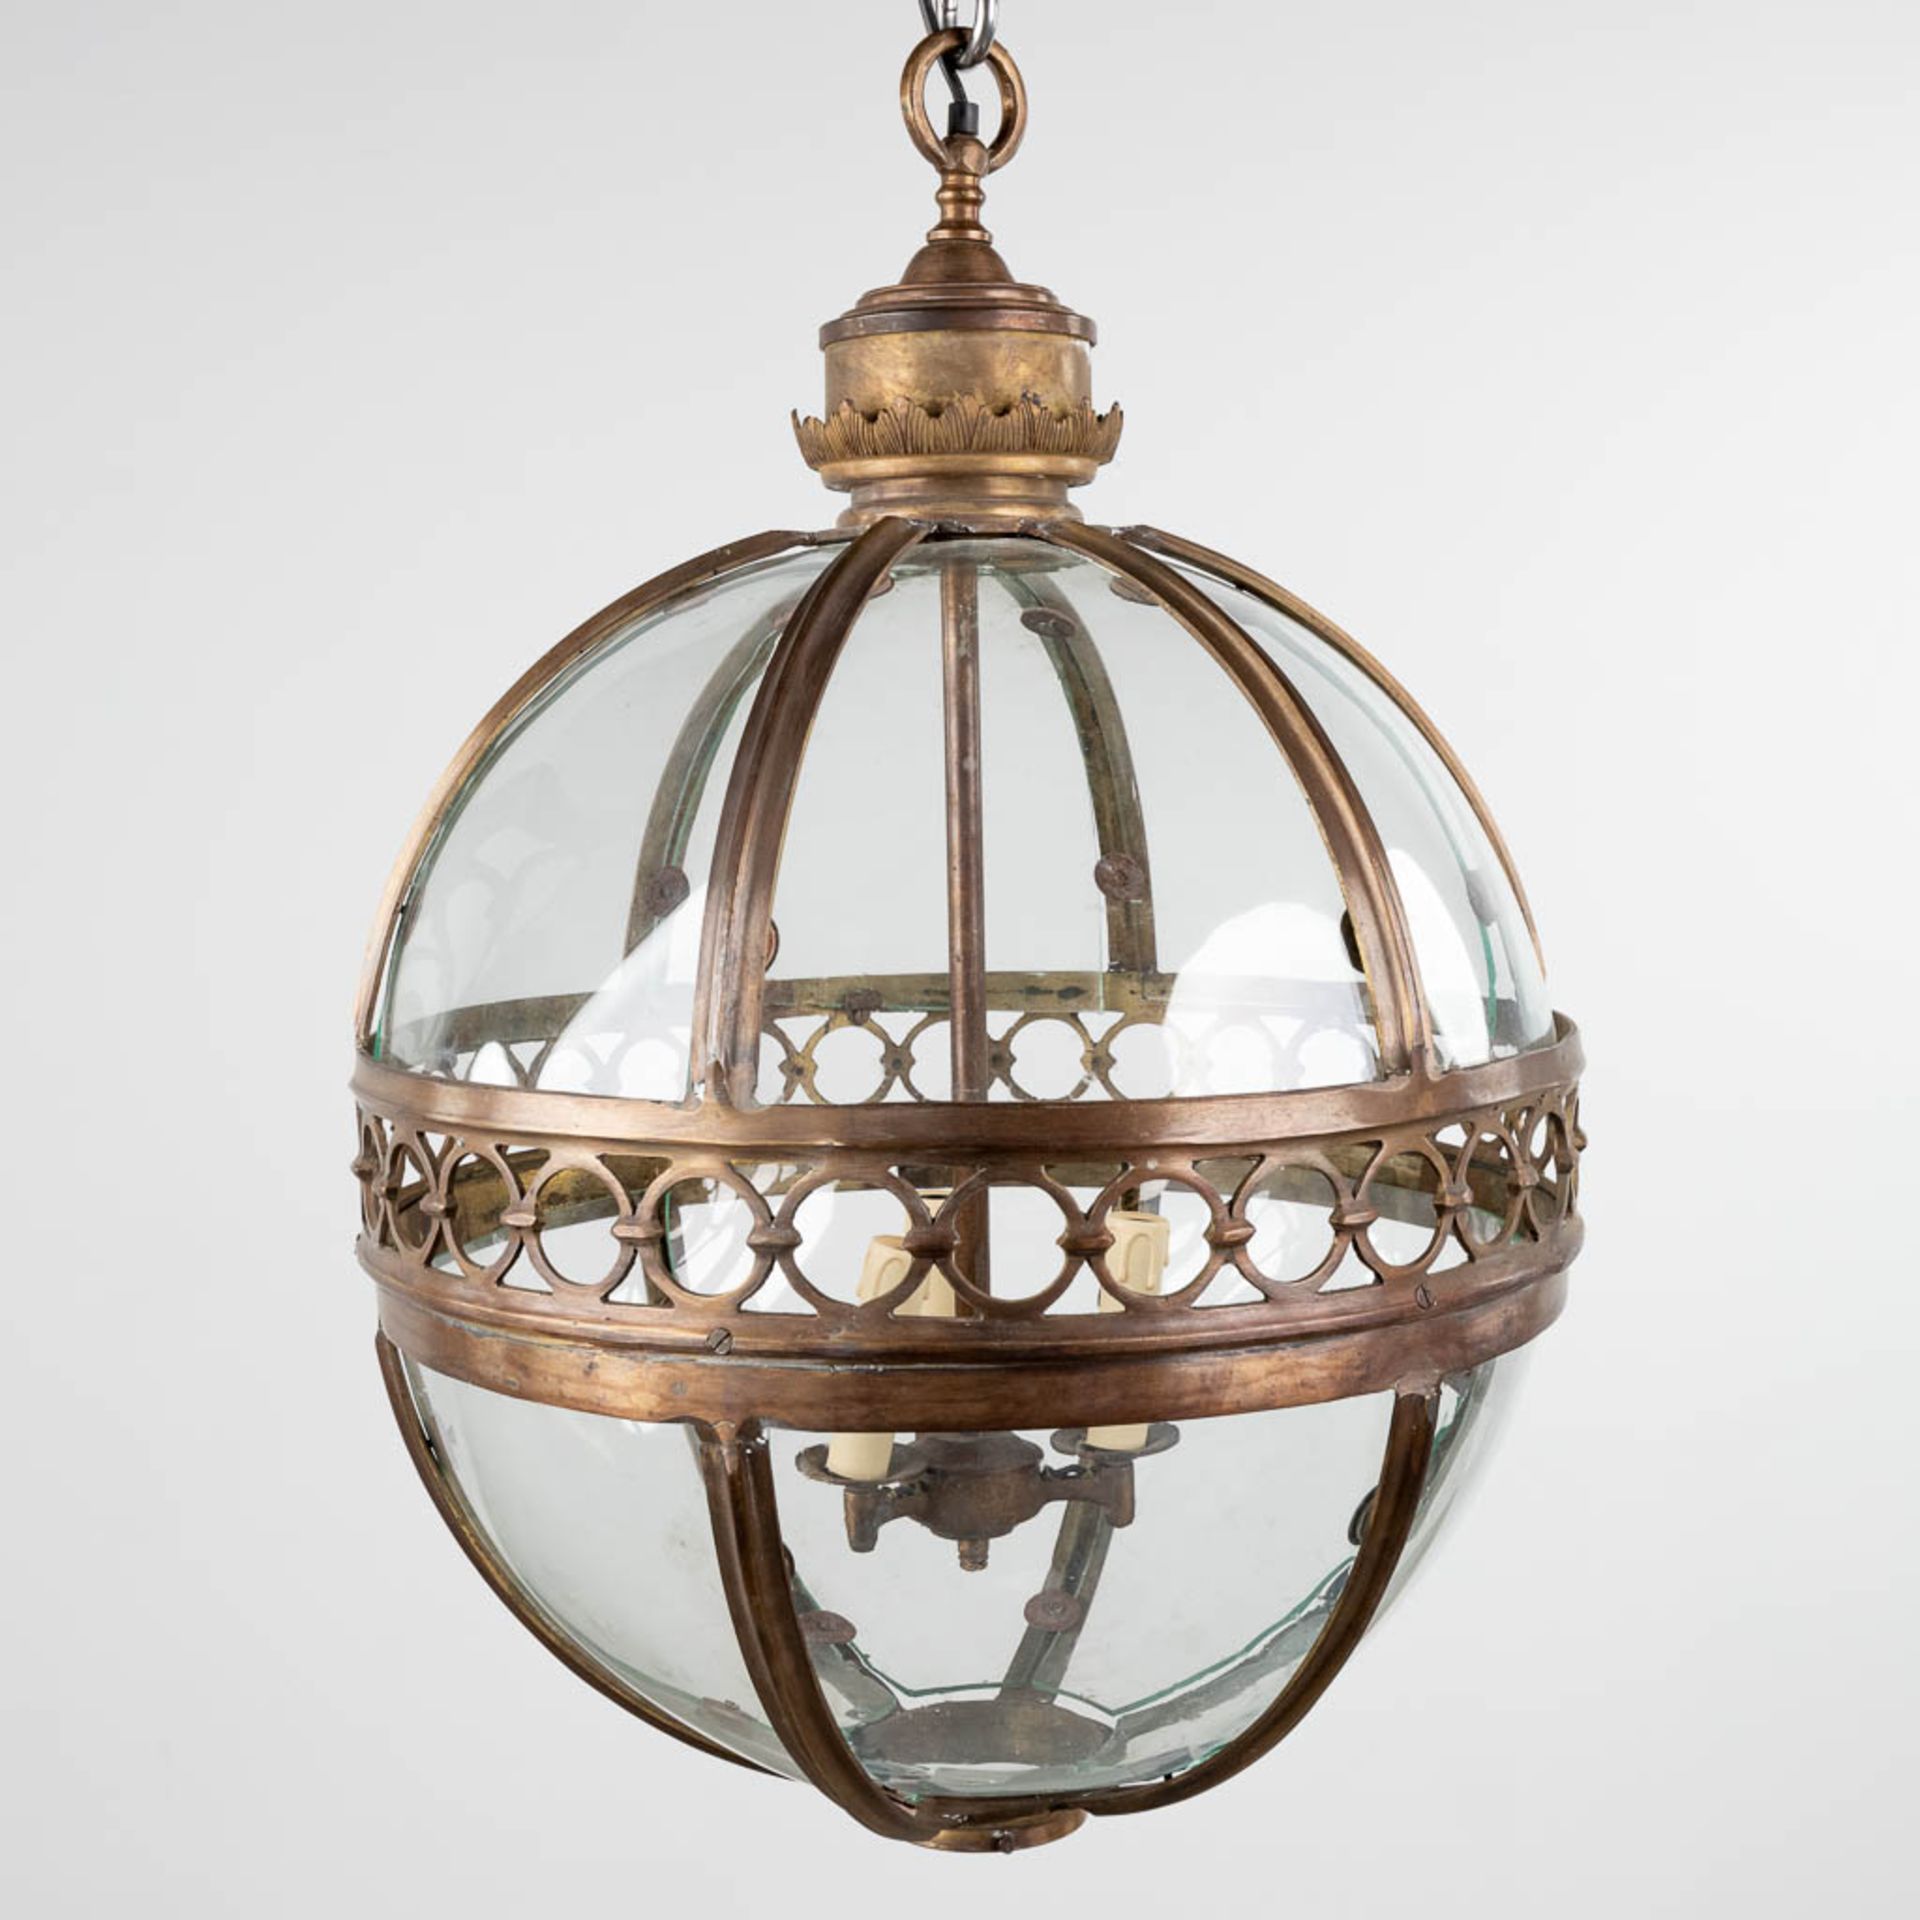 A lantern in the shape of a ball, made of glass and brass. 20th C. (H:70 x D:56 cm)